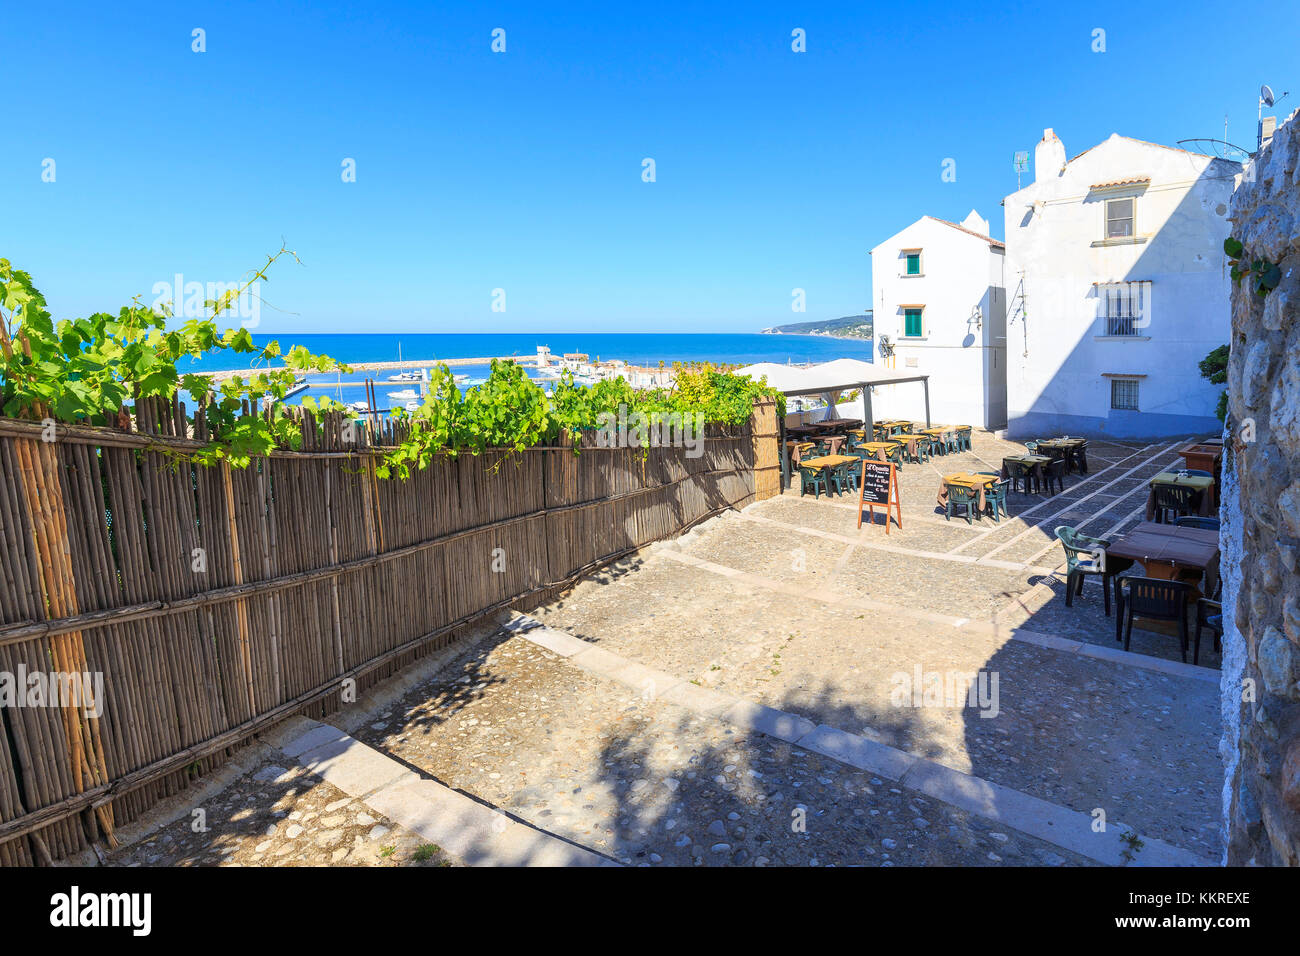 Square of the old town of Rodi Garganico with look over the harbor. Apulia(Puglia), Italy. Stock Photo